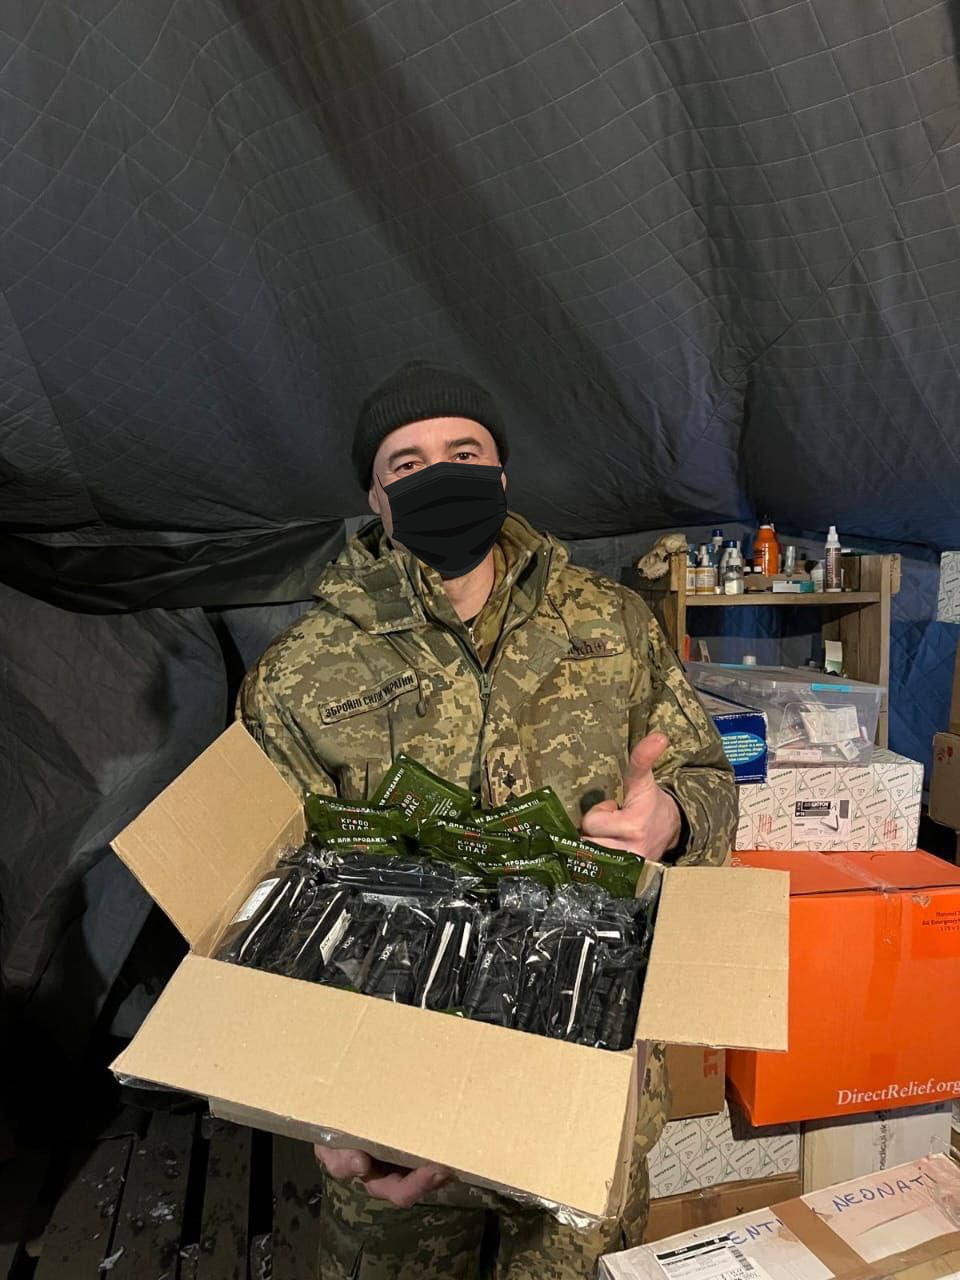 United With Ukraine sources life-saving medical, tactical, and humanitarian supplies and operates through a network of local organizations Blood-stopping tourniquets